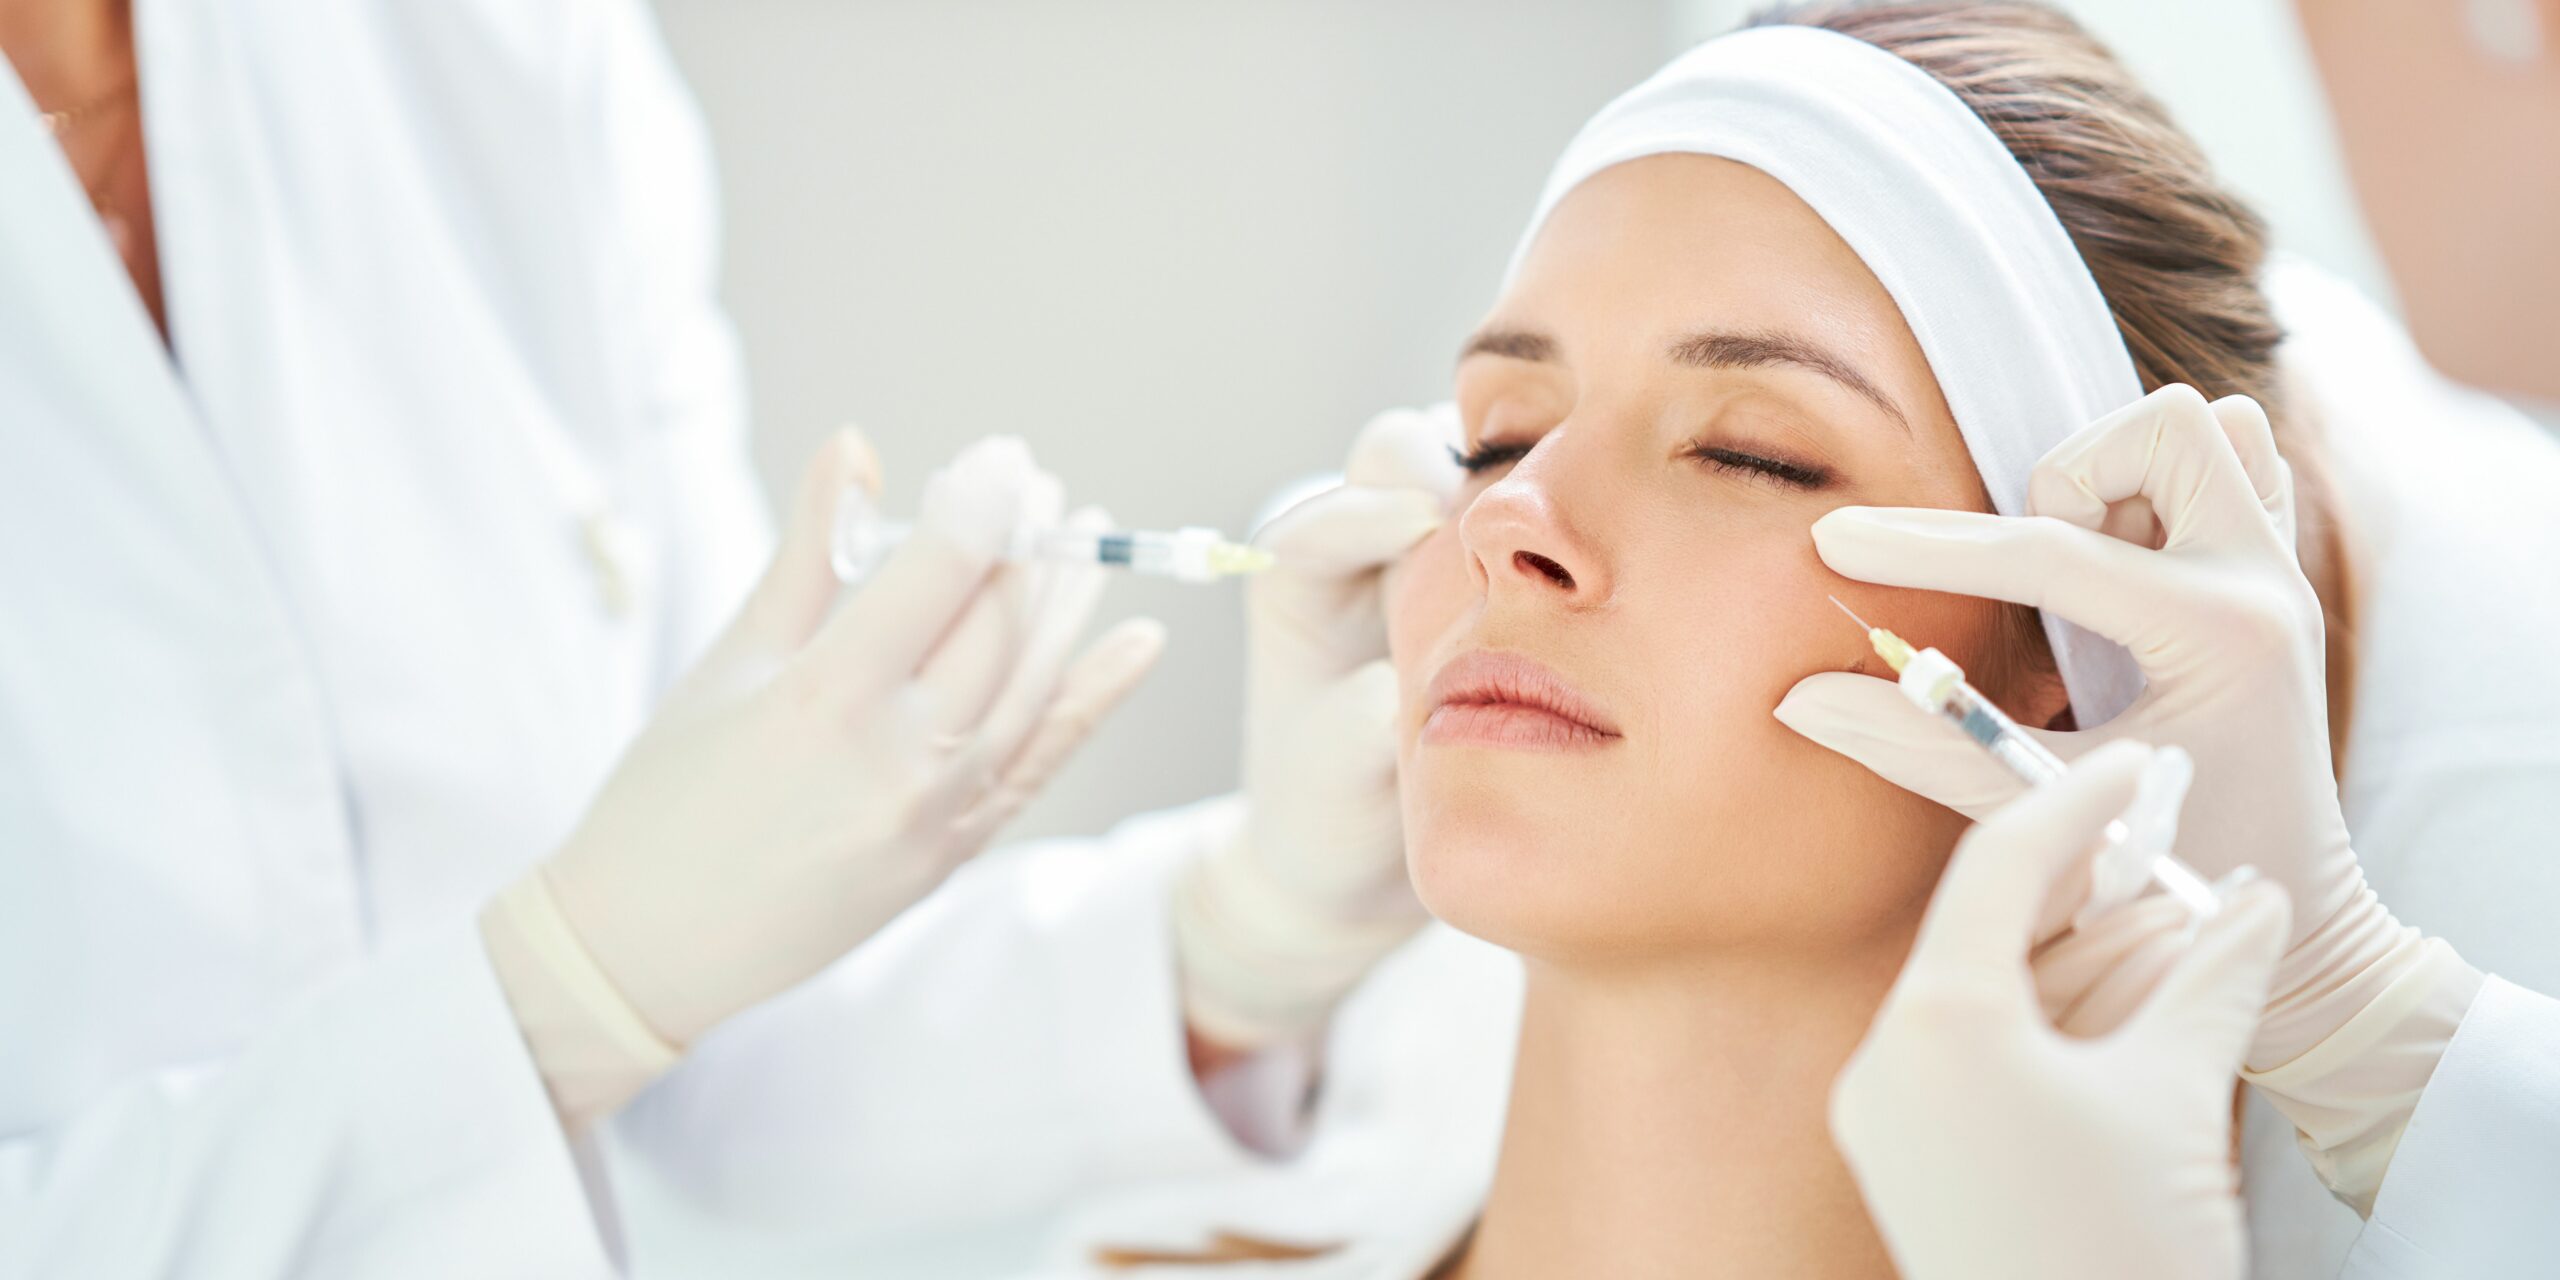 Top Secrets You Need to Know About Under Eye Filler in 2023